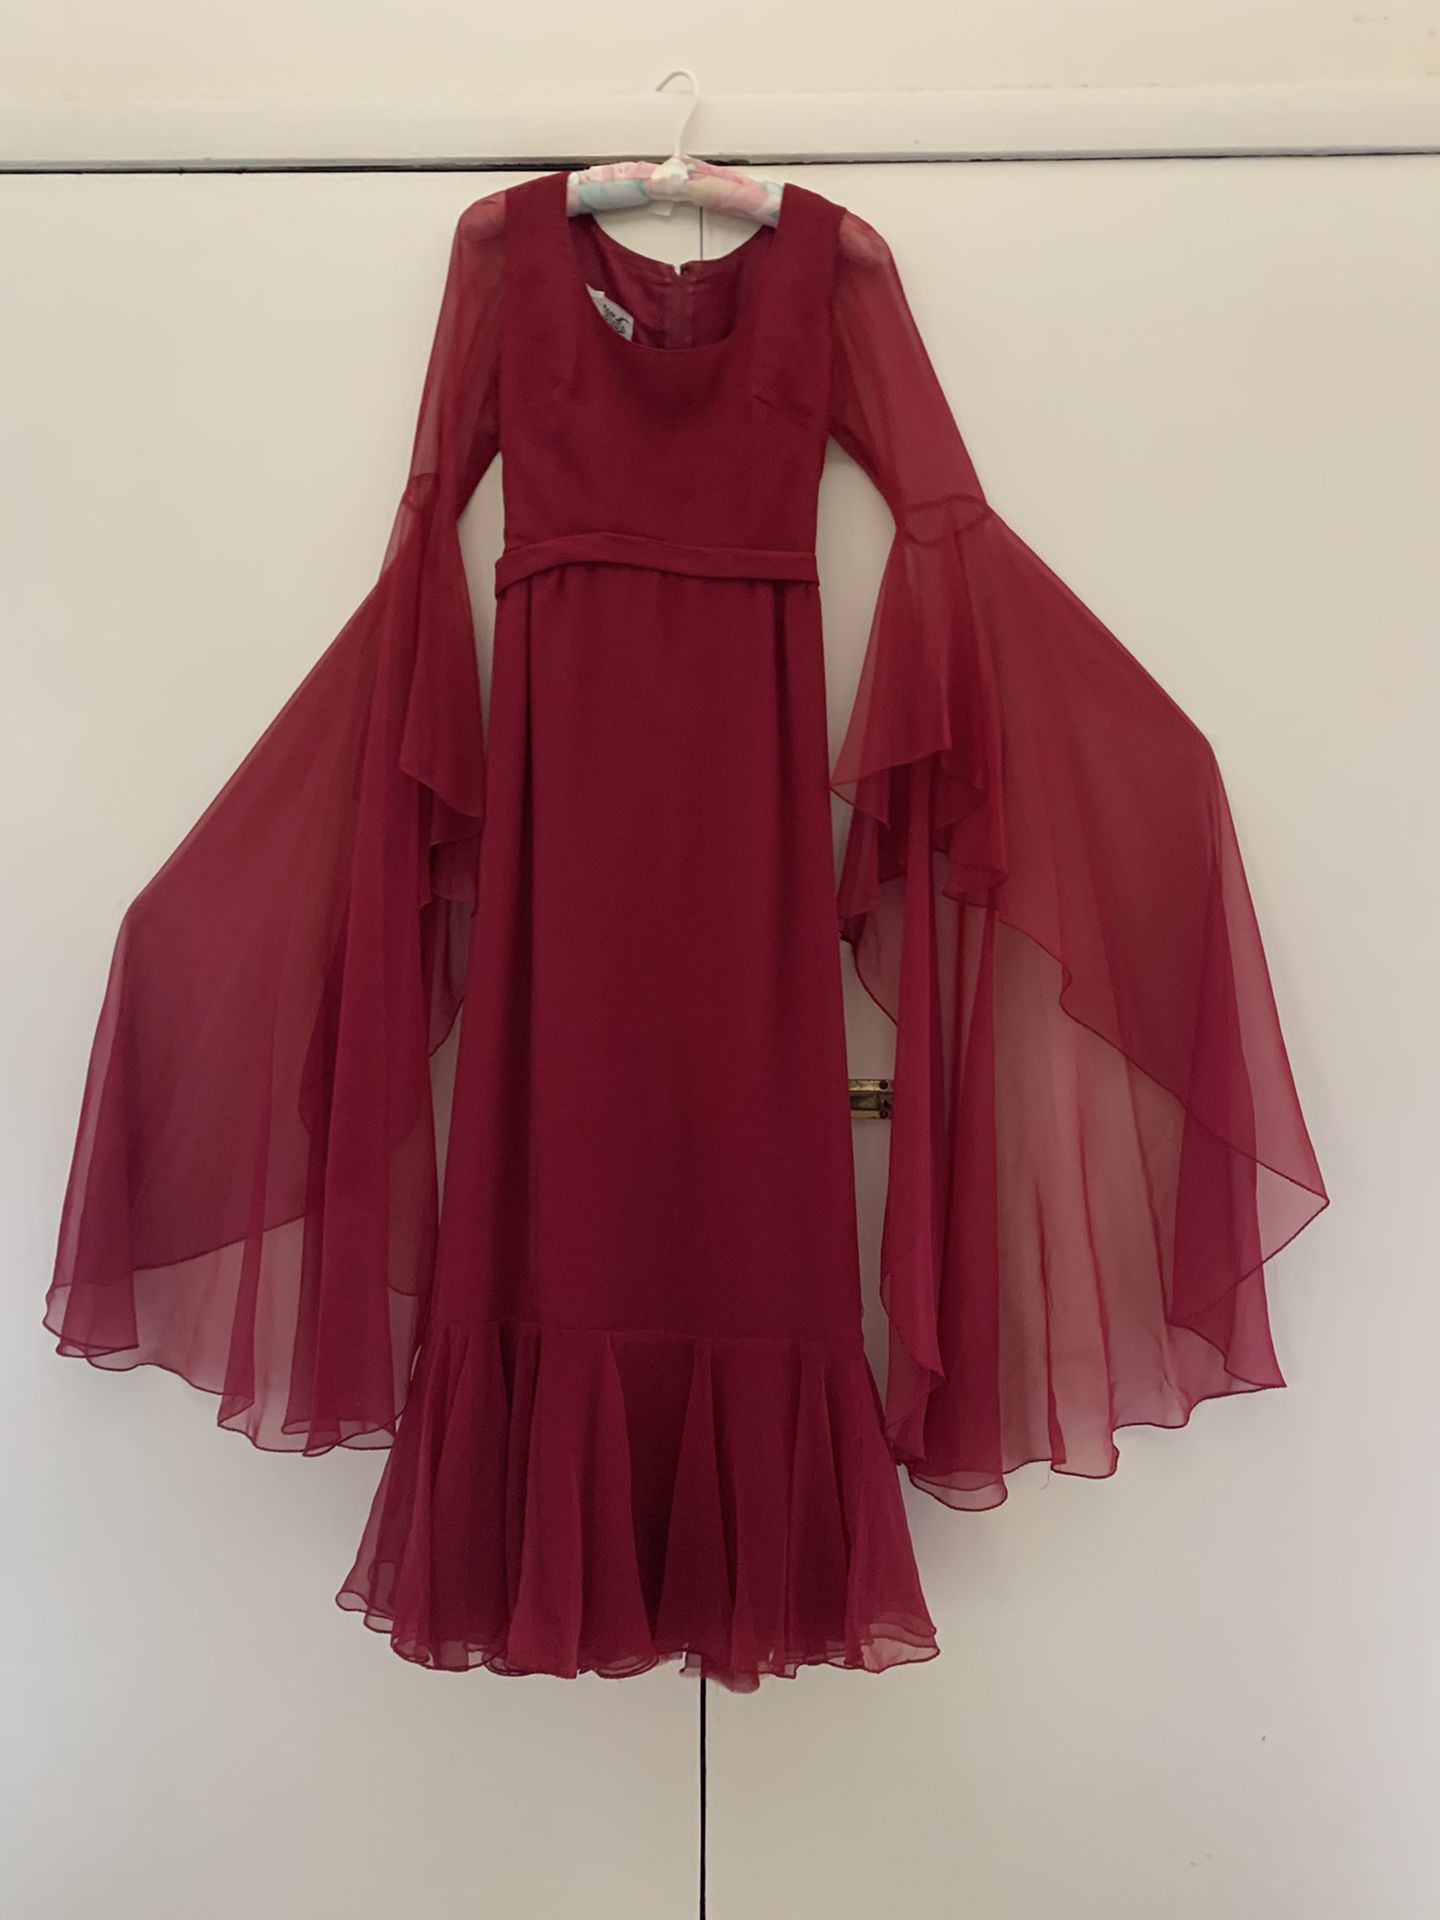 Vintage evening dress from the ‘60’s. Looks like a Stevie Nicks Dress !